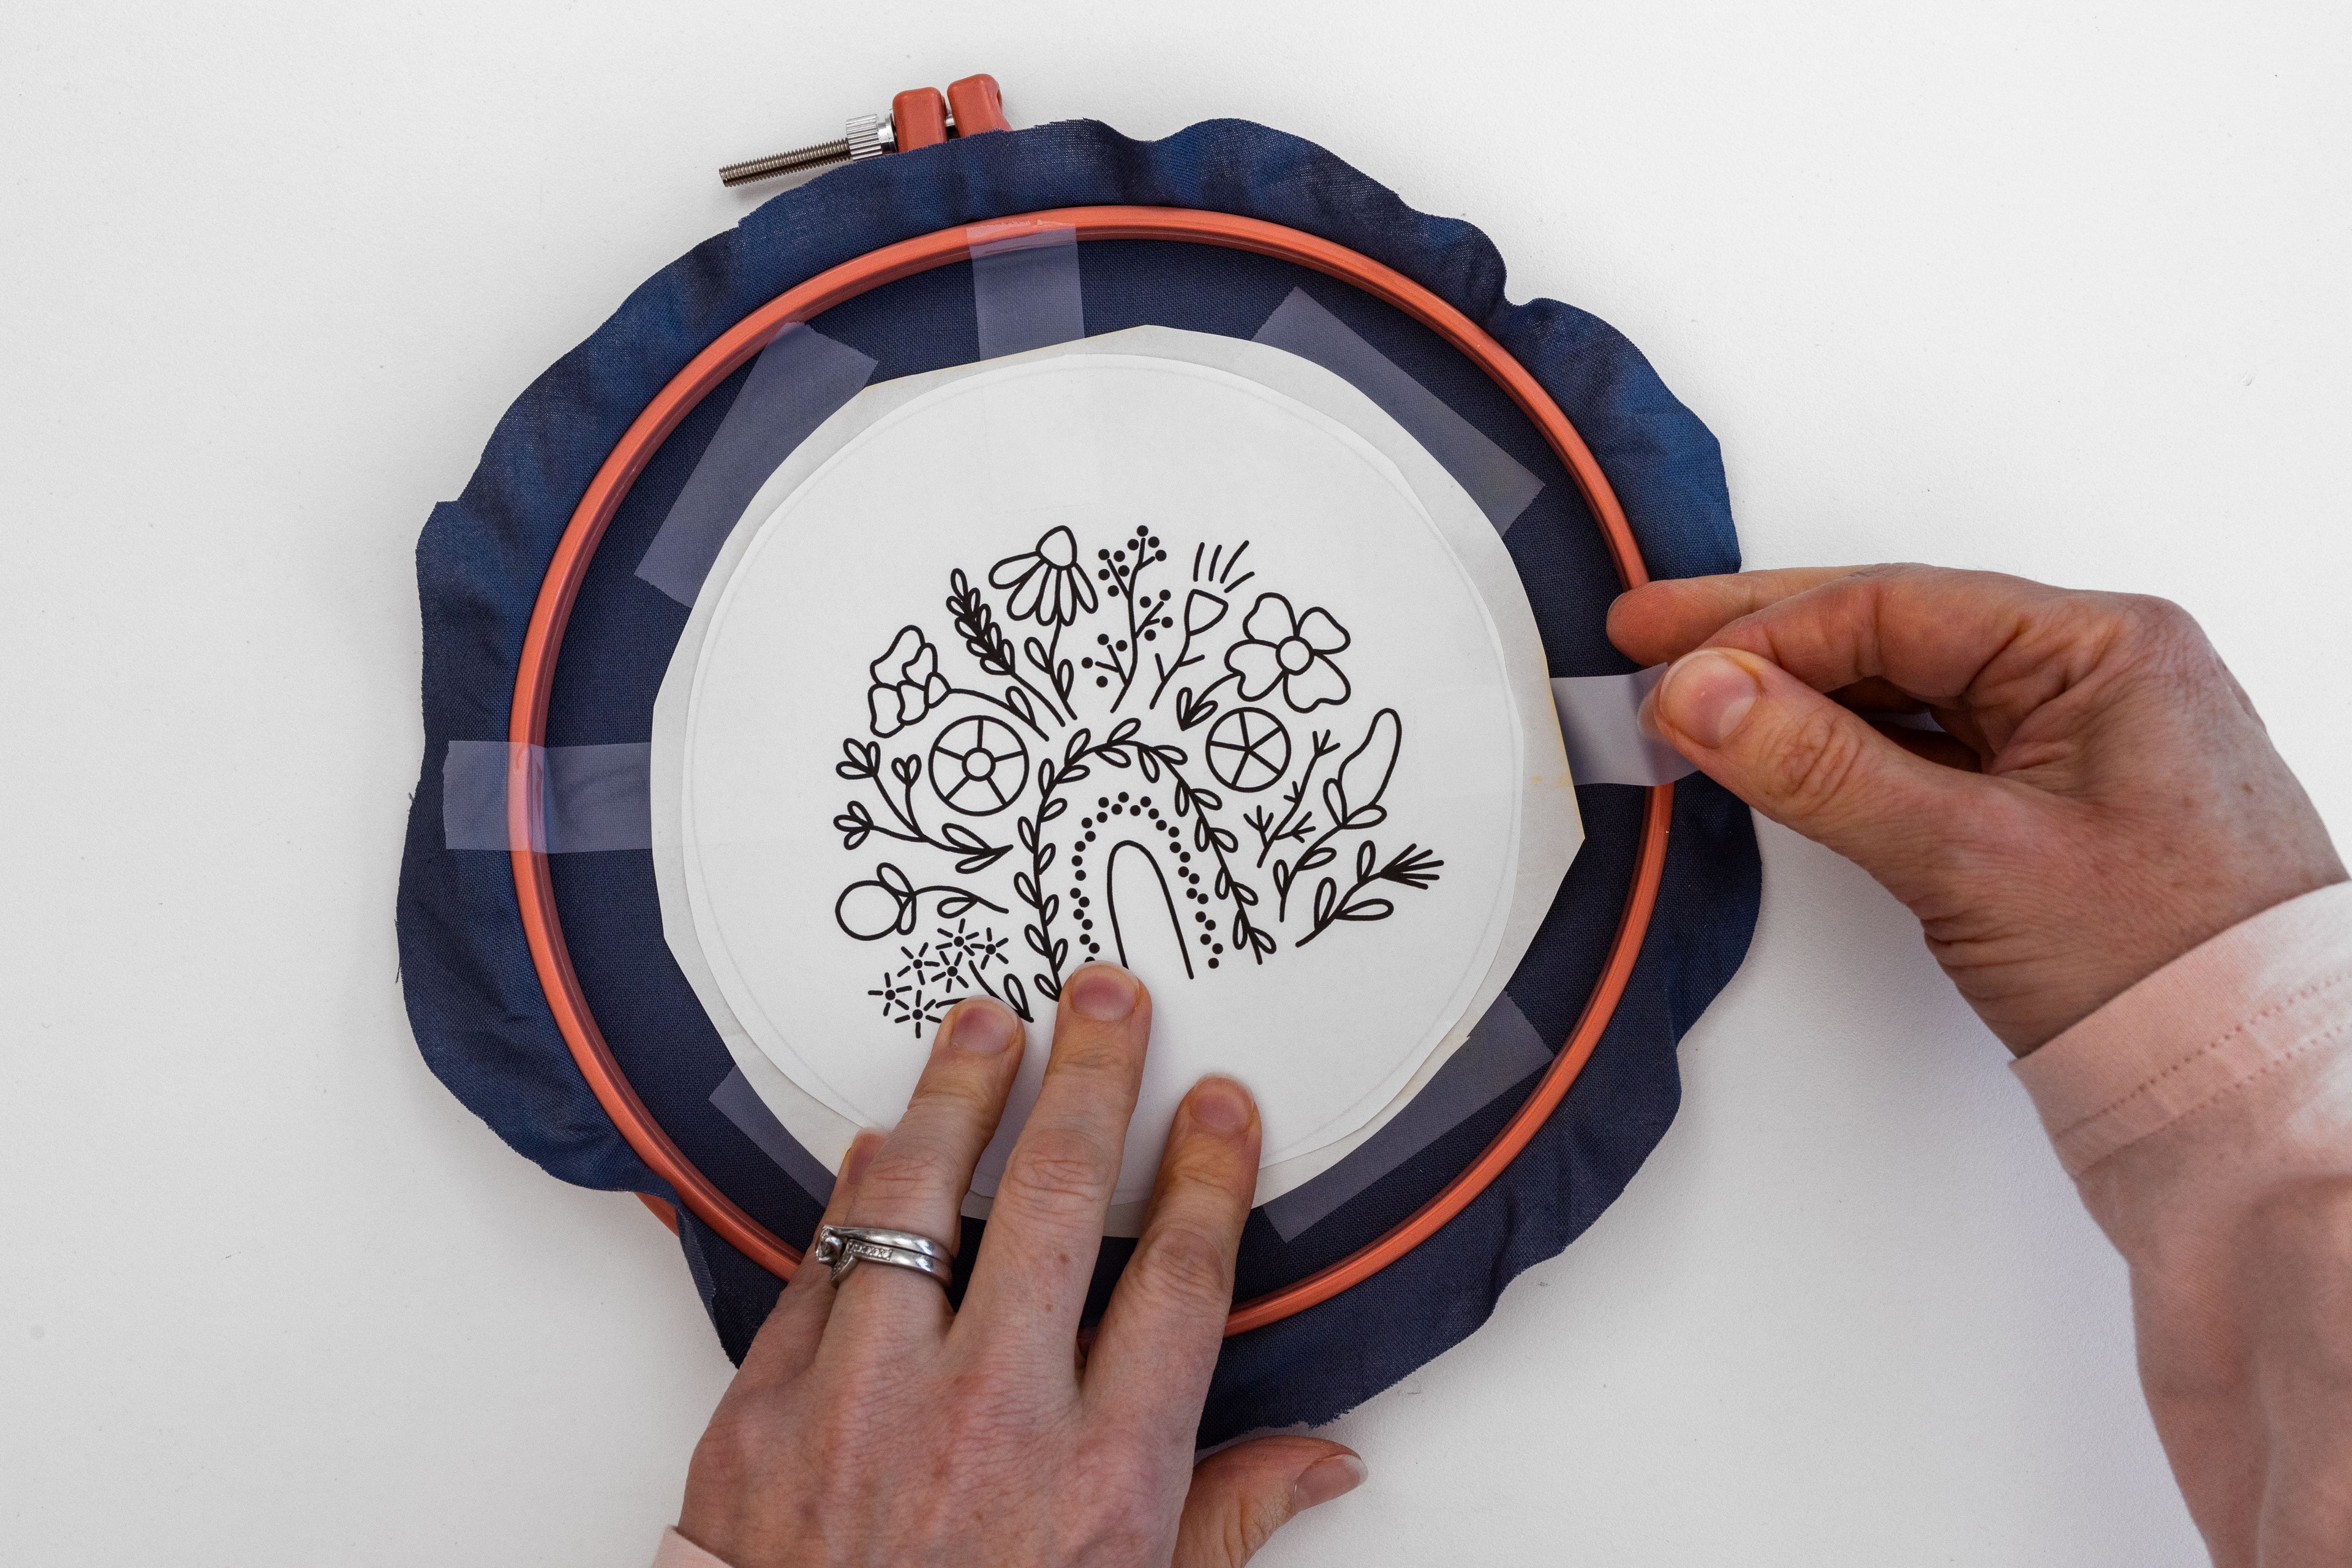 A hand cellotapes the design onto the back of the fabric.